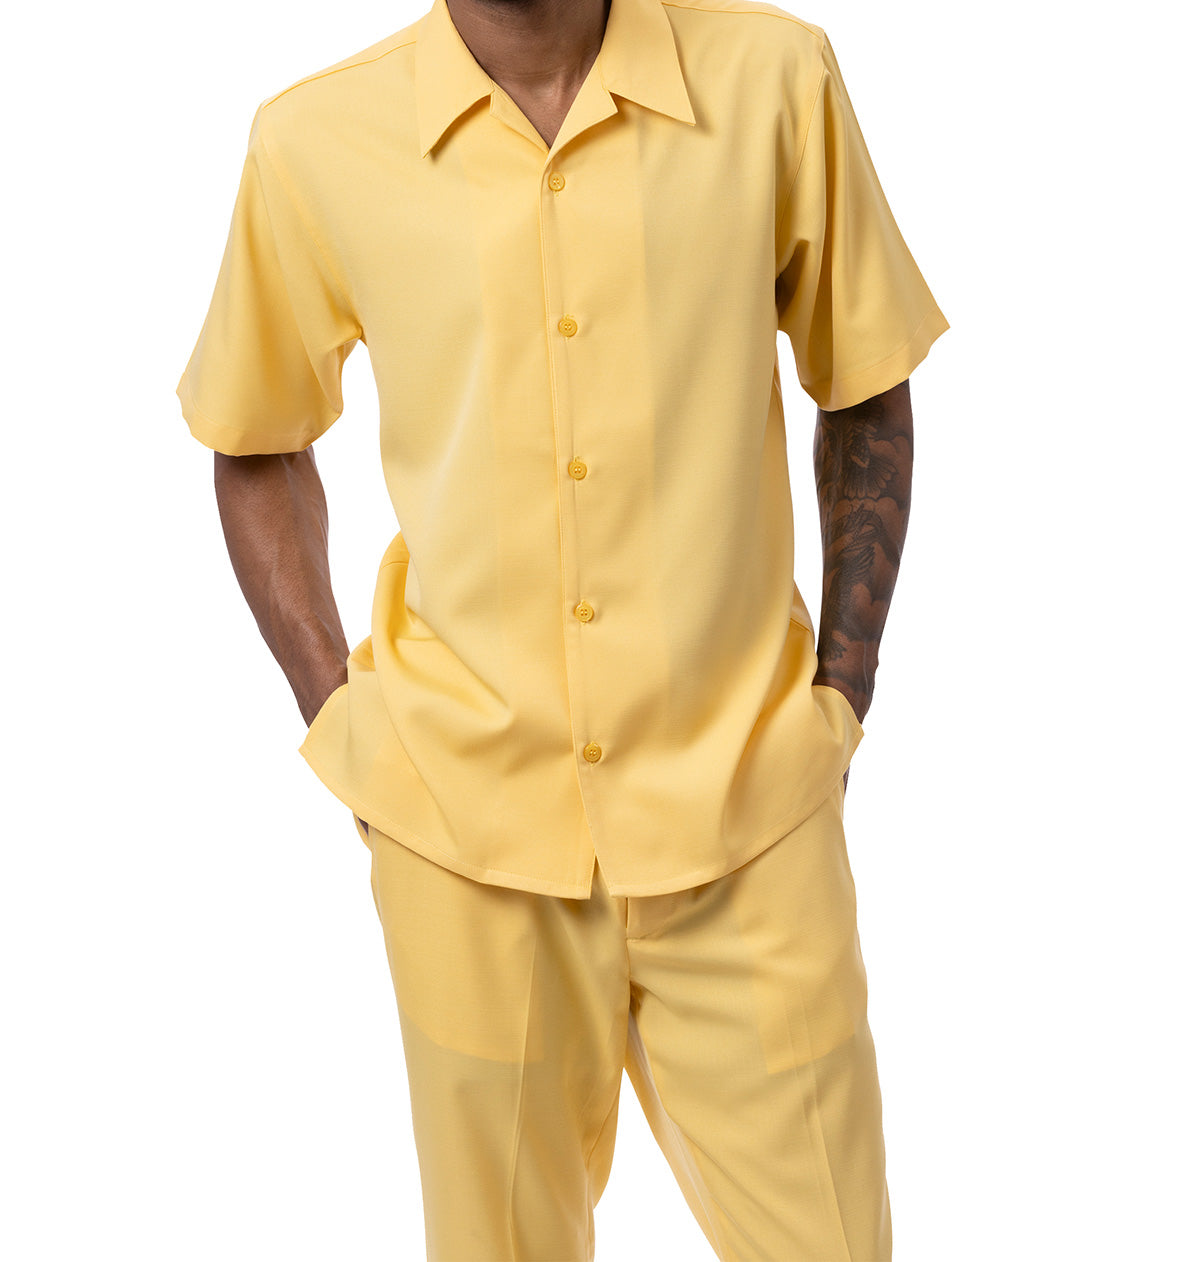 Solid Canary Walking Suit 2 Piece Short Sleeve Set